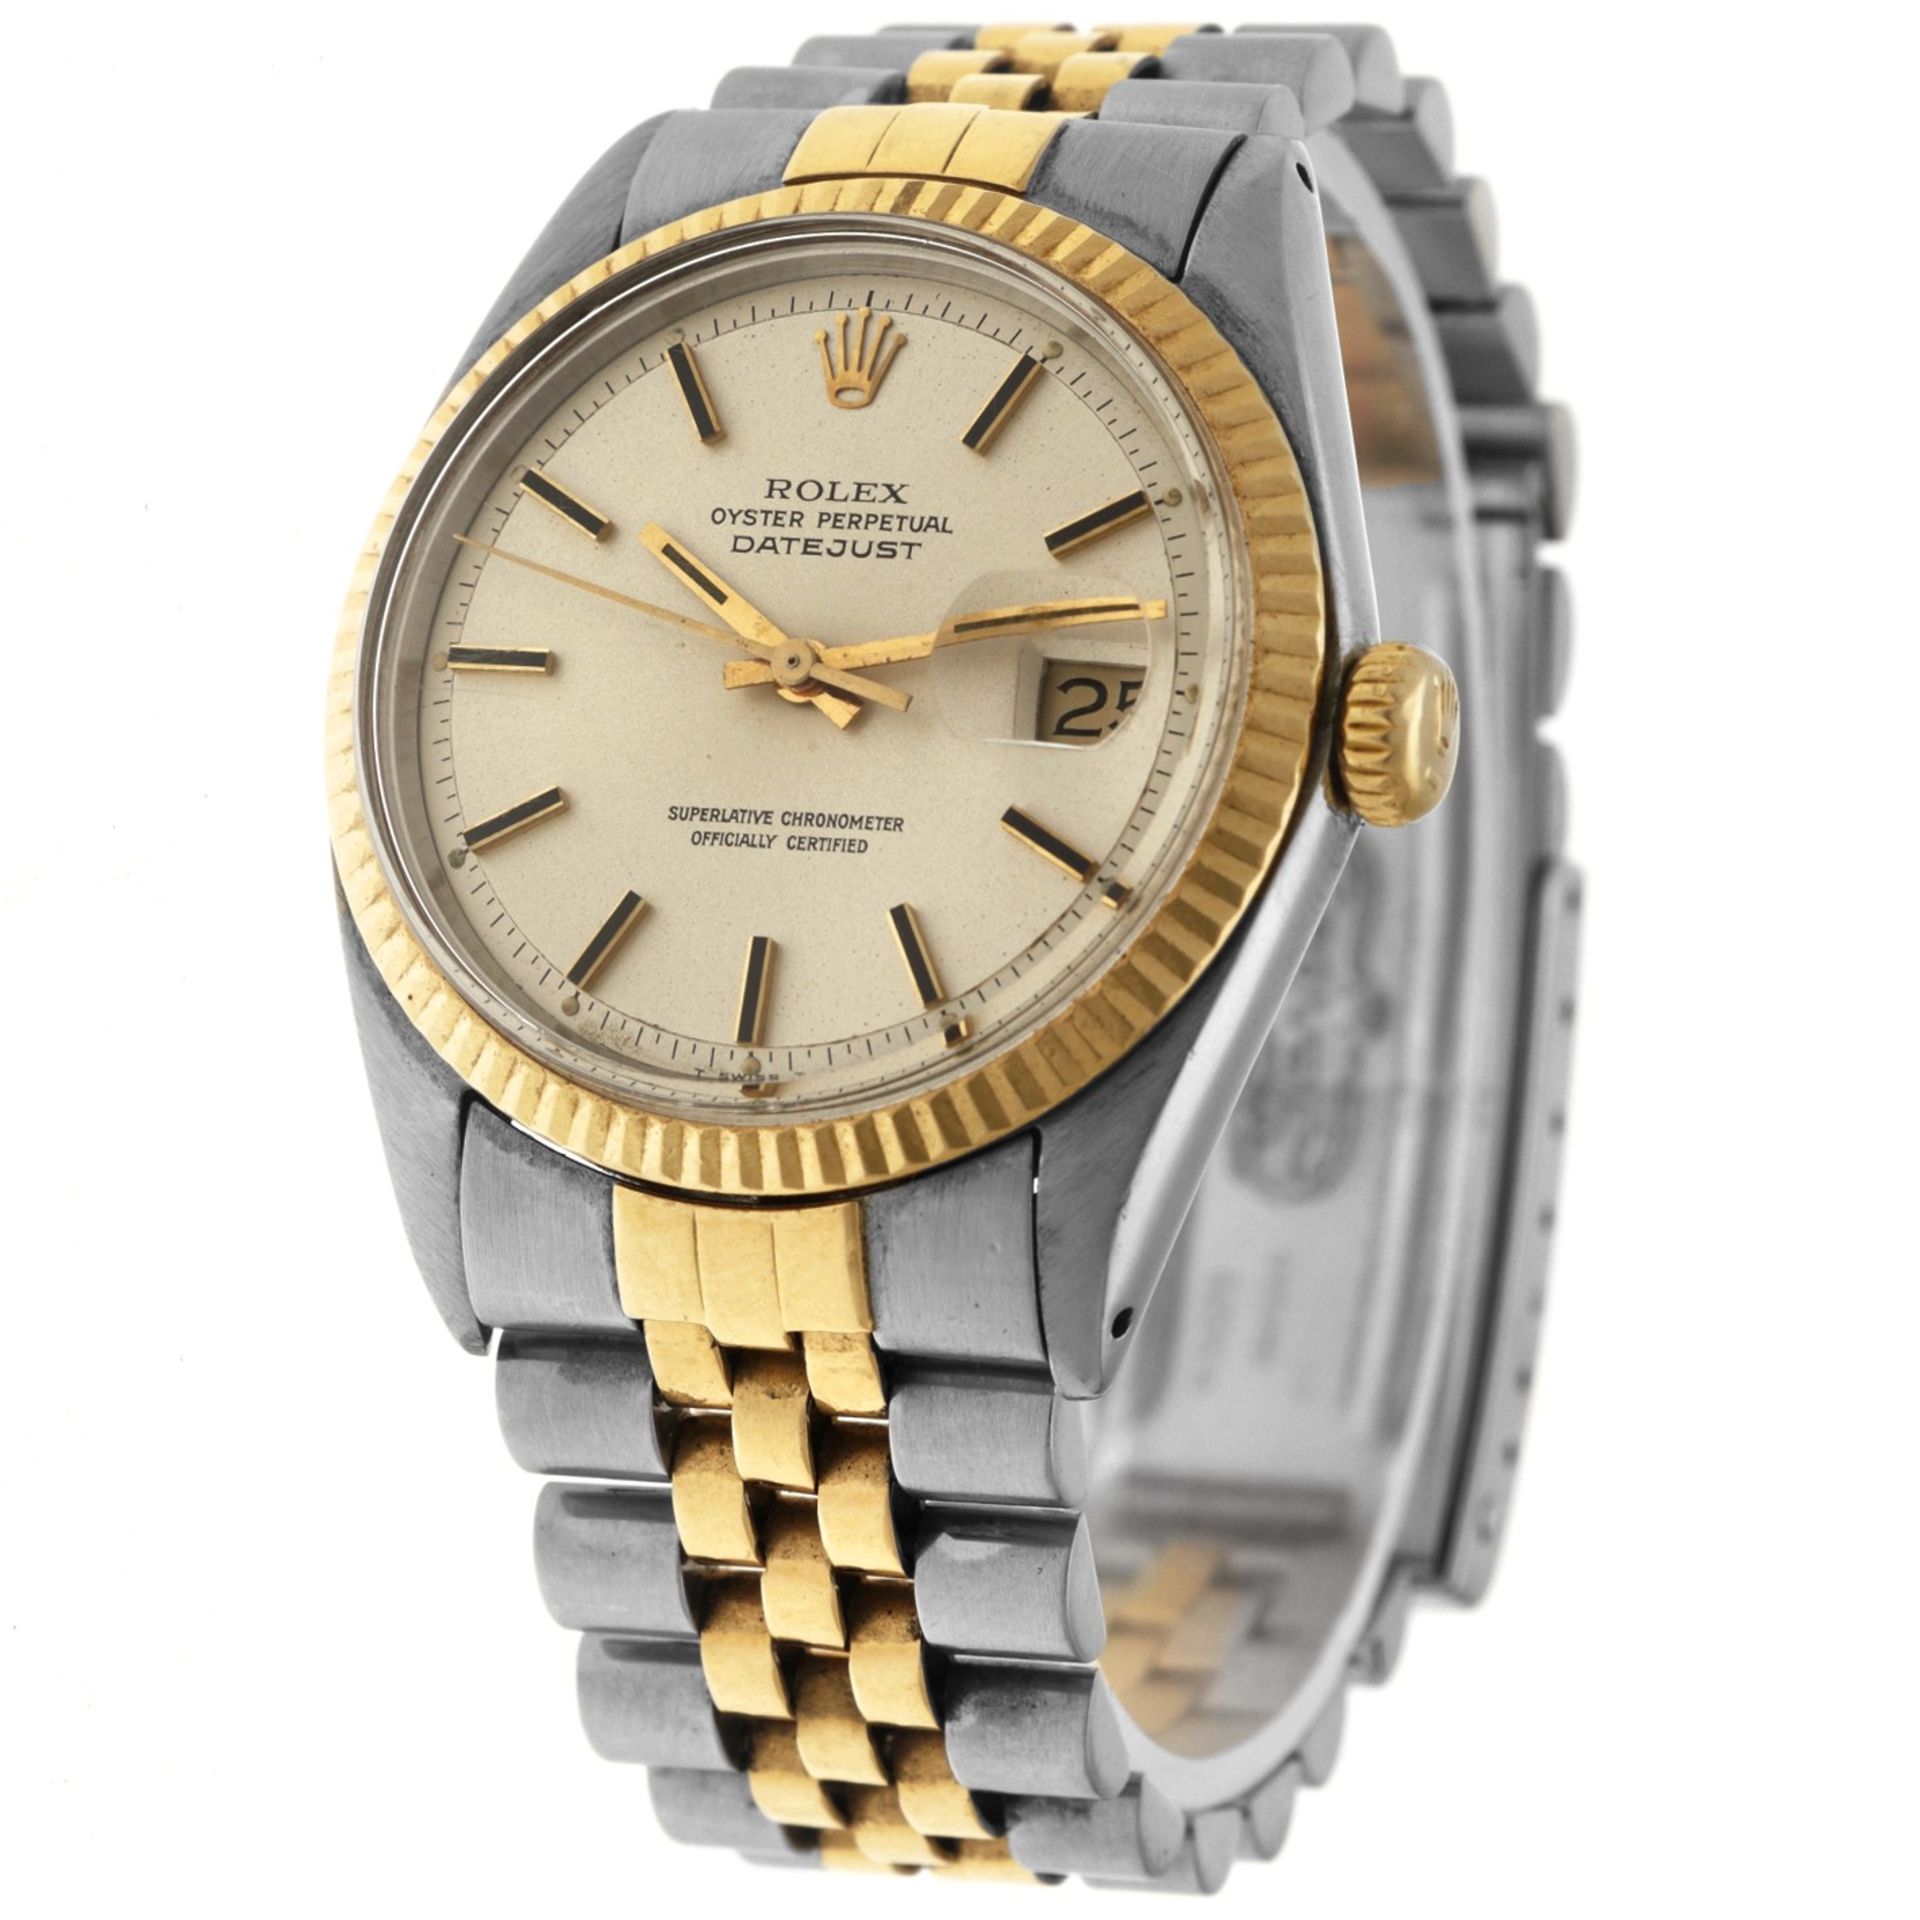 No Reserve - Rolex Datejust 36 1601 - Men's watch - approx. 1980. - Image 2 of 5